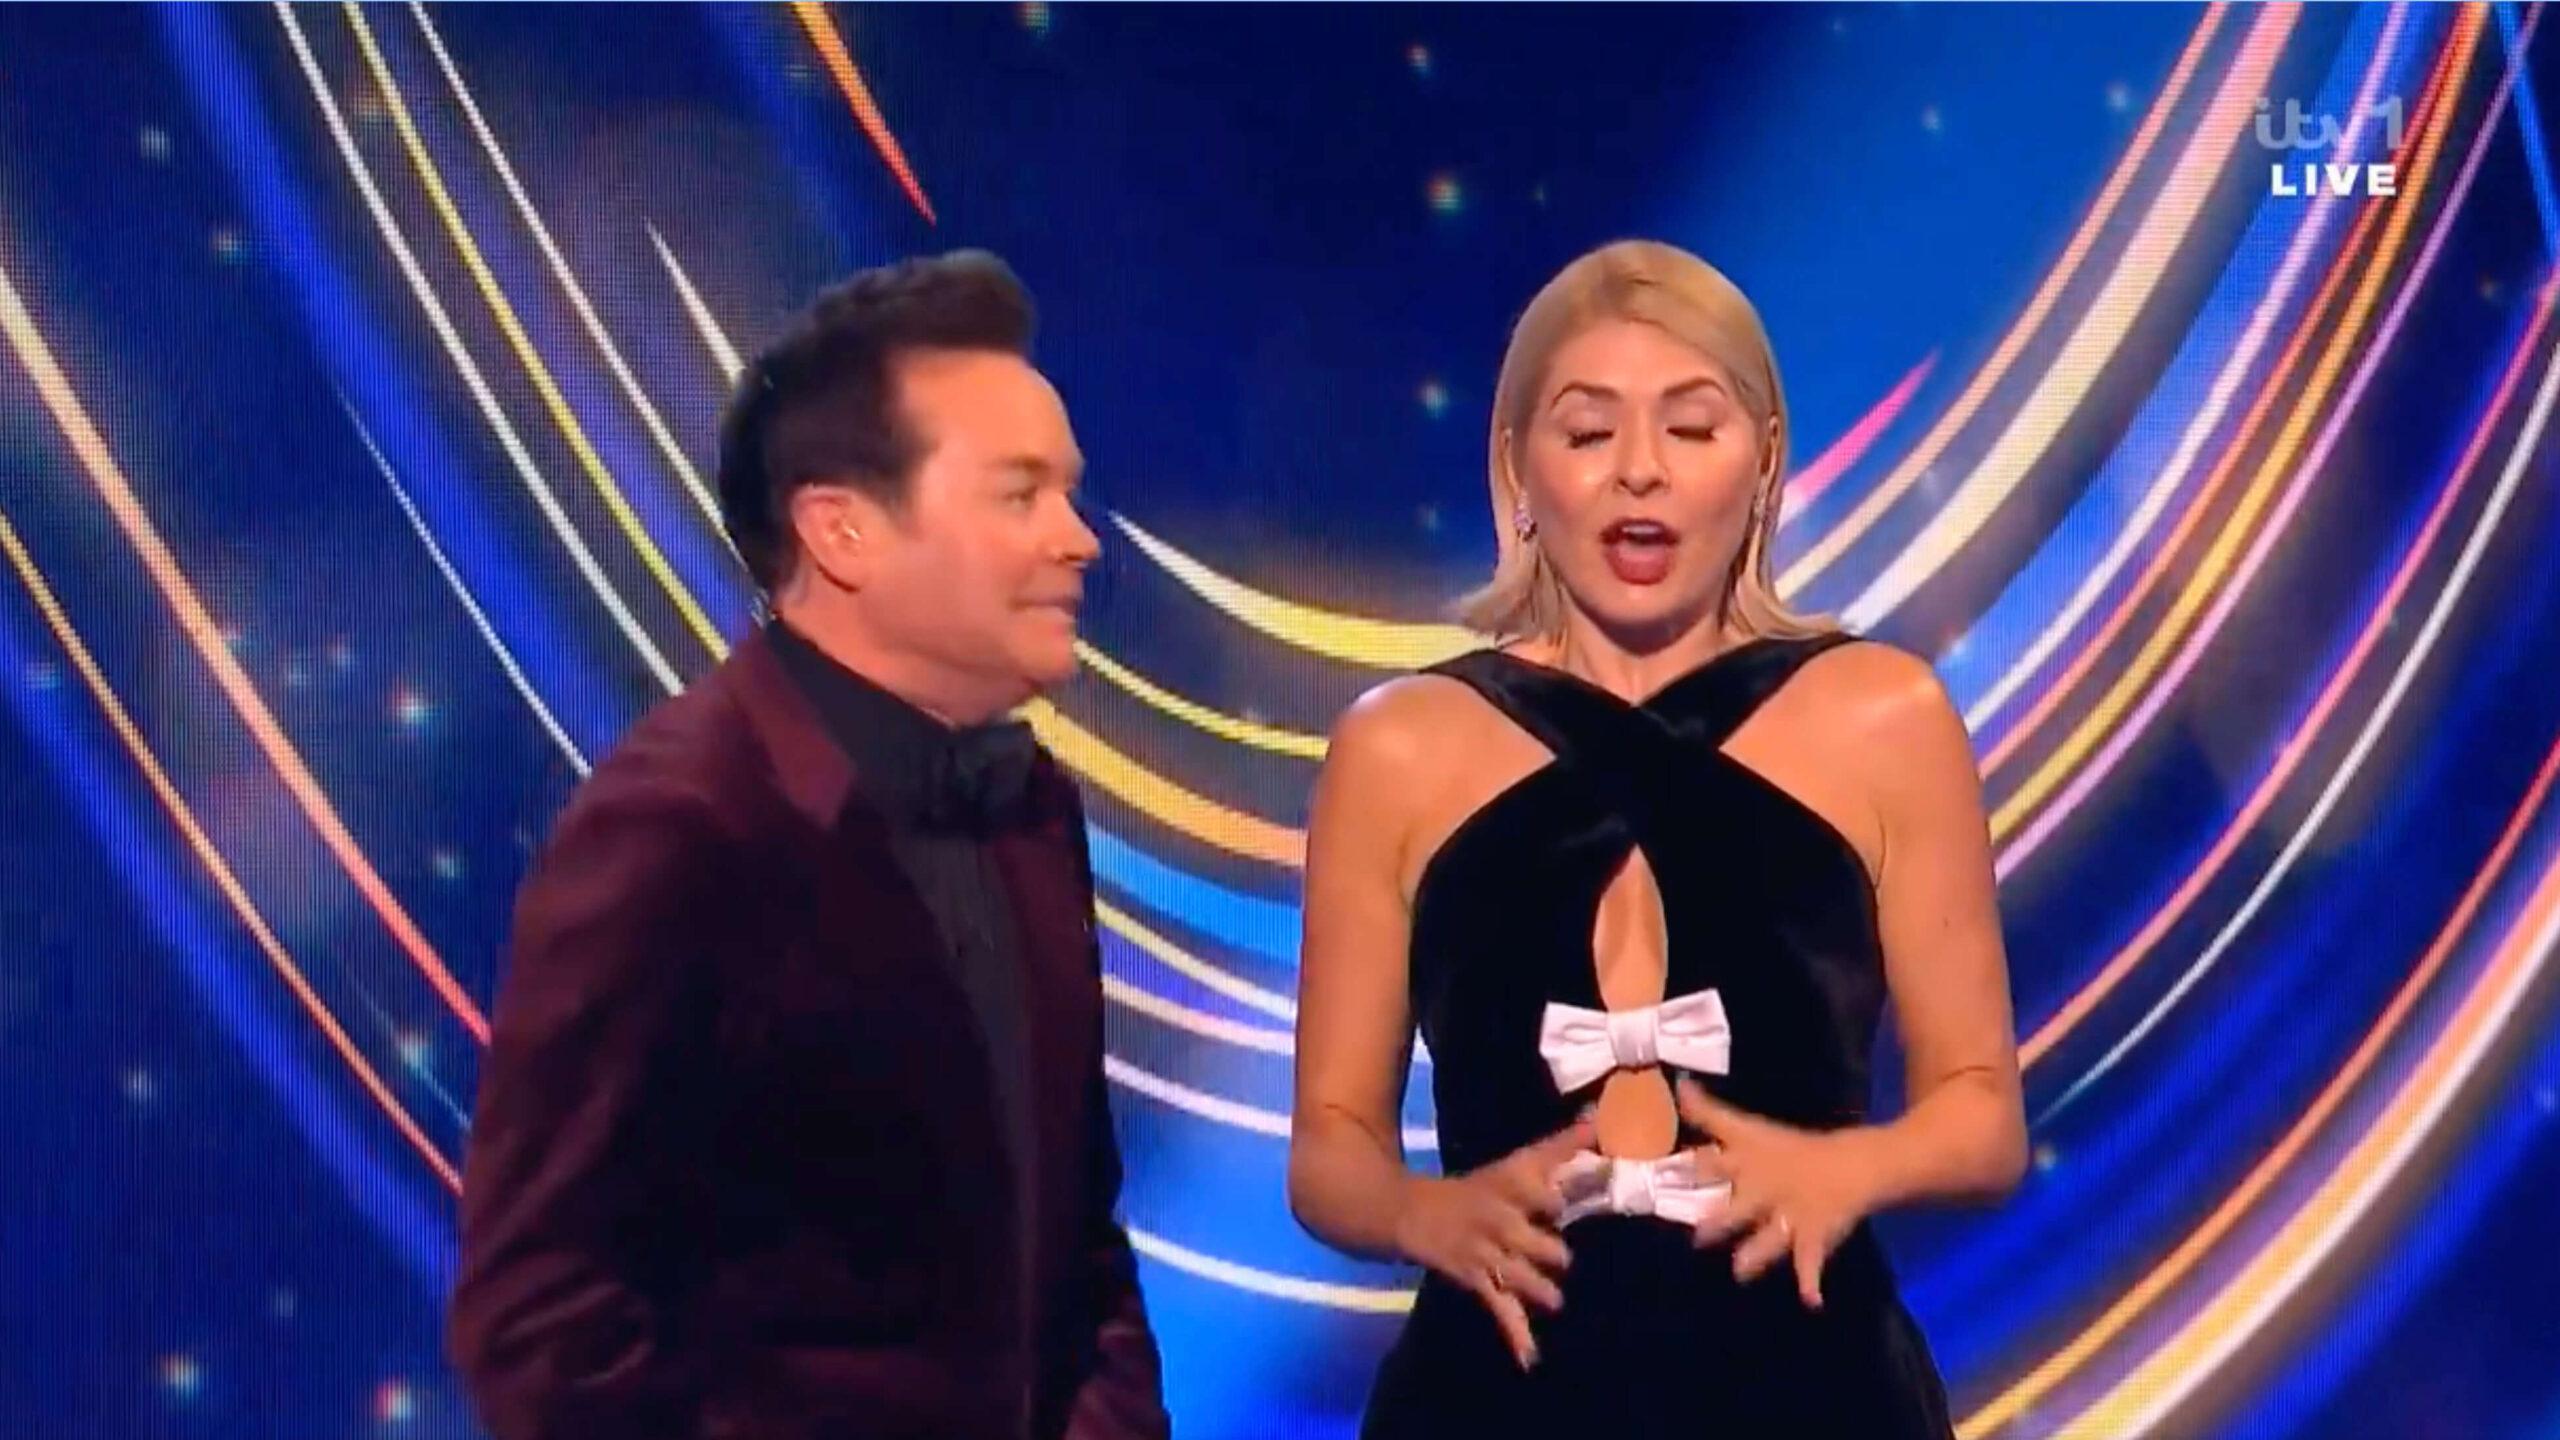 Stephen Mulhern startles Holly Willhoughby, Dancing on Ice.